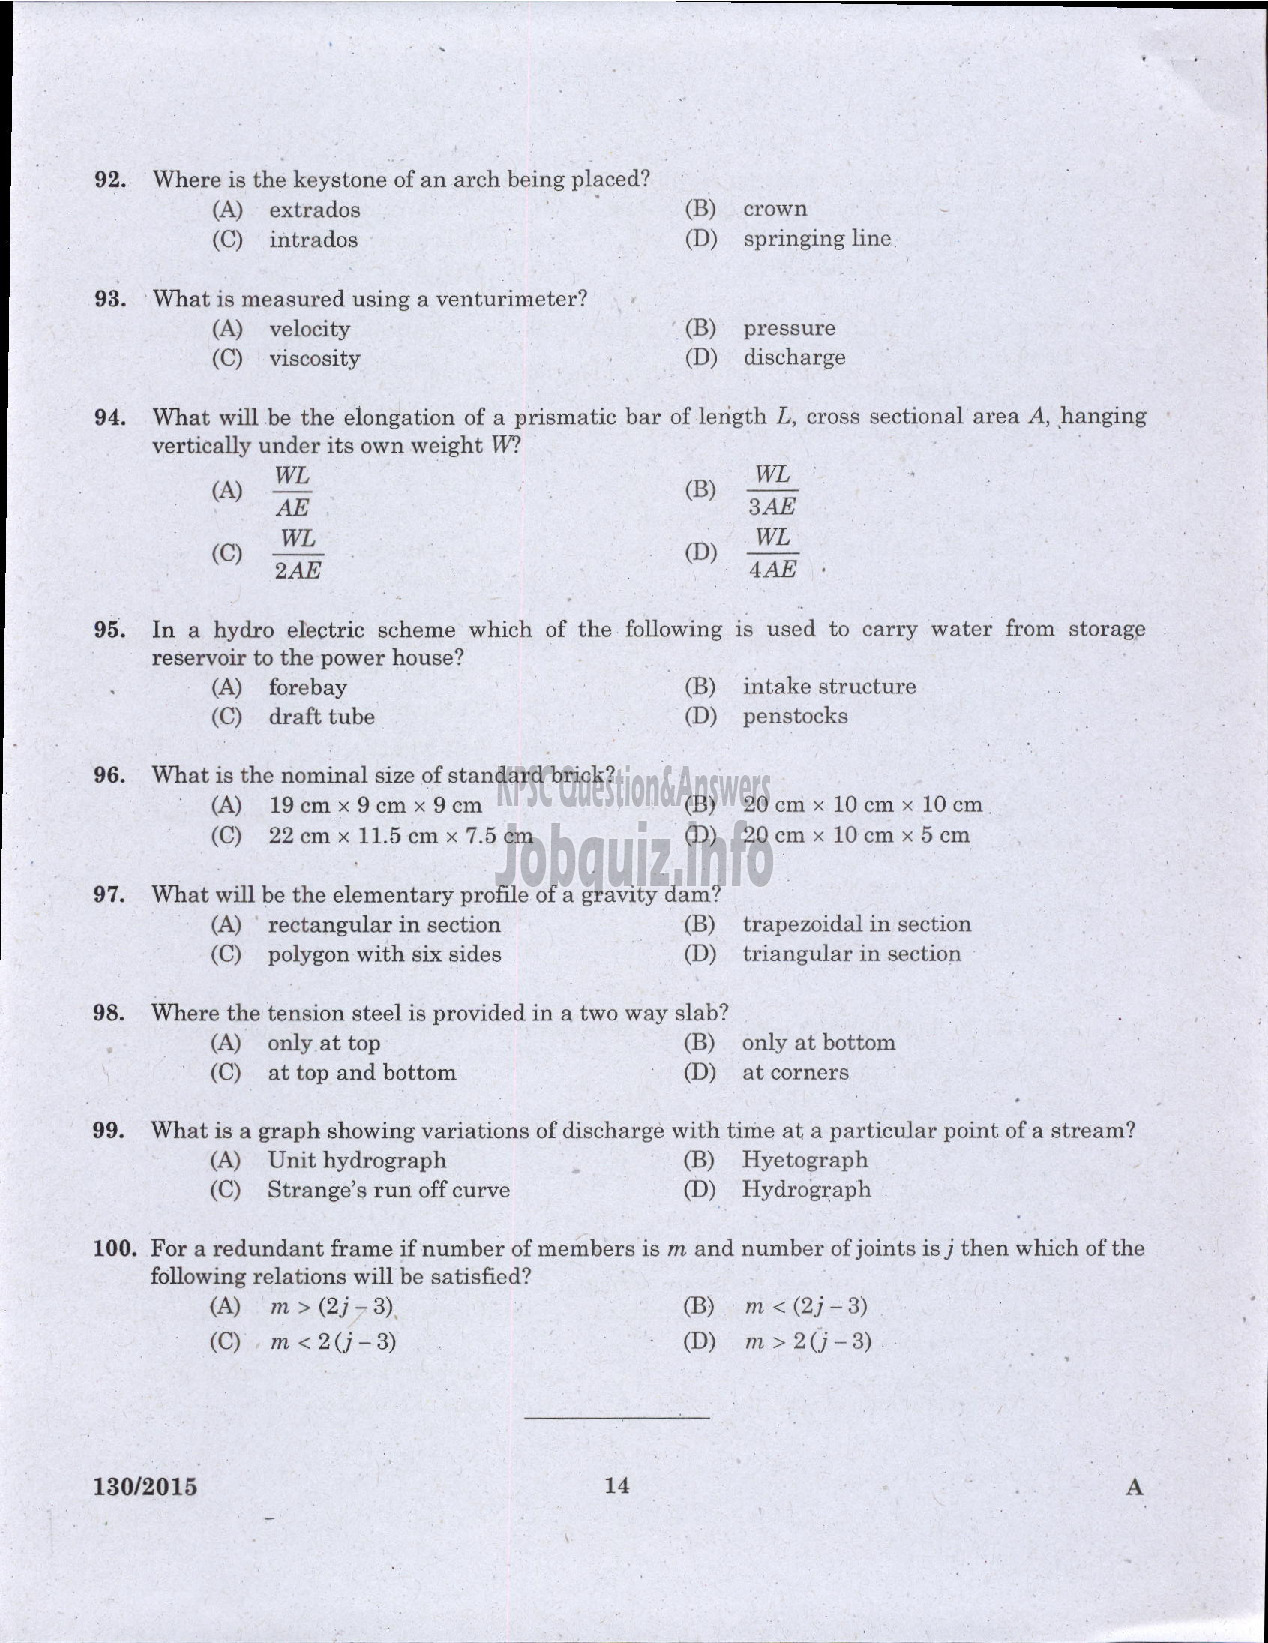 Kerala PSC Question Paper - ASSISTANT ENGINEER CIVIL LOCAL SELF GOVERNMENT/PWD/IRRIGATION-12